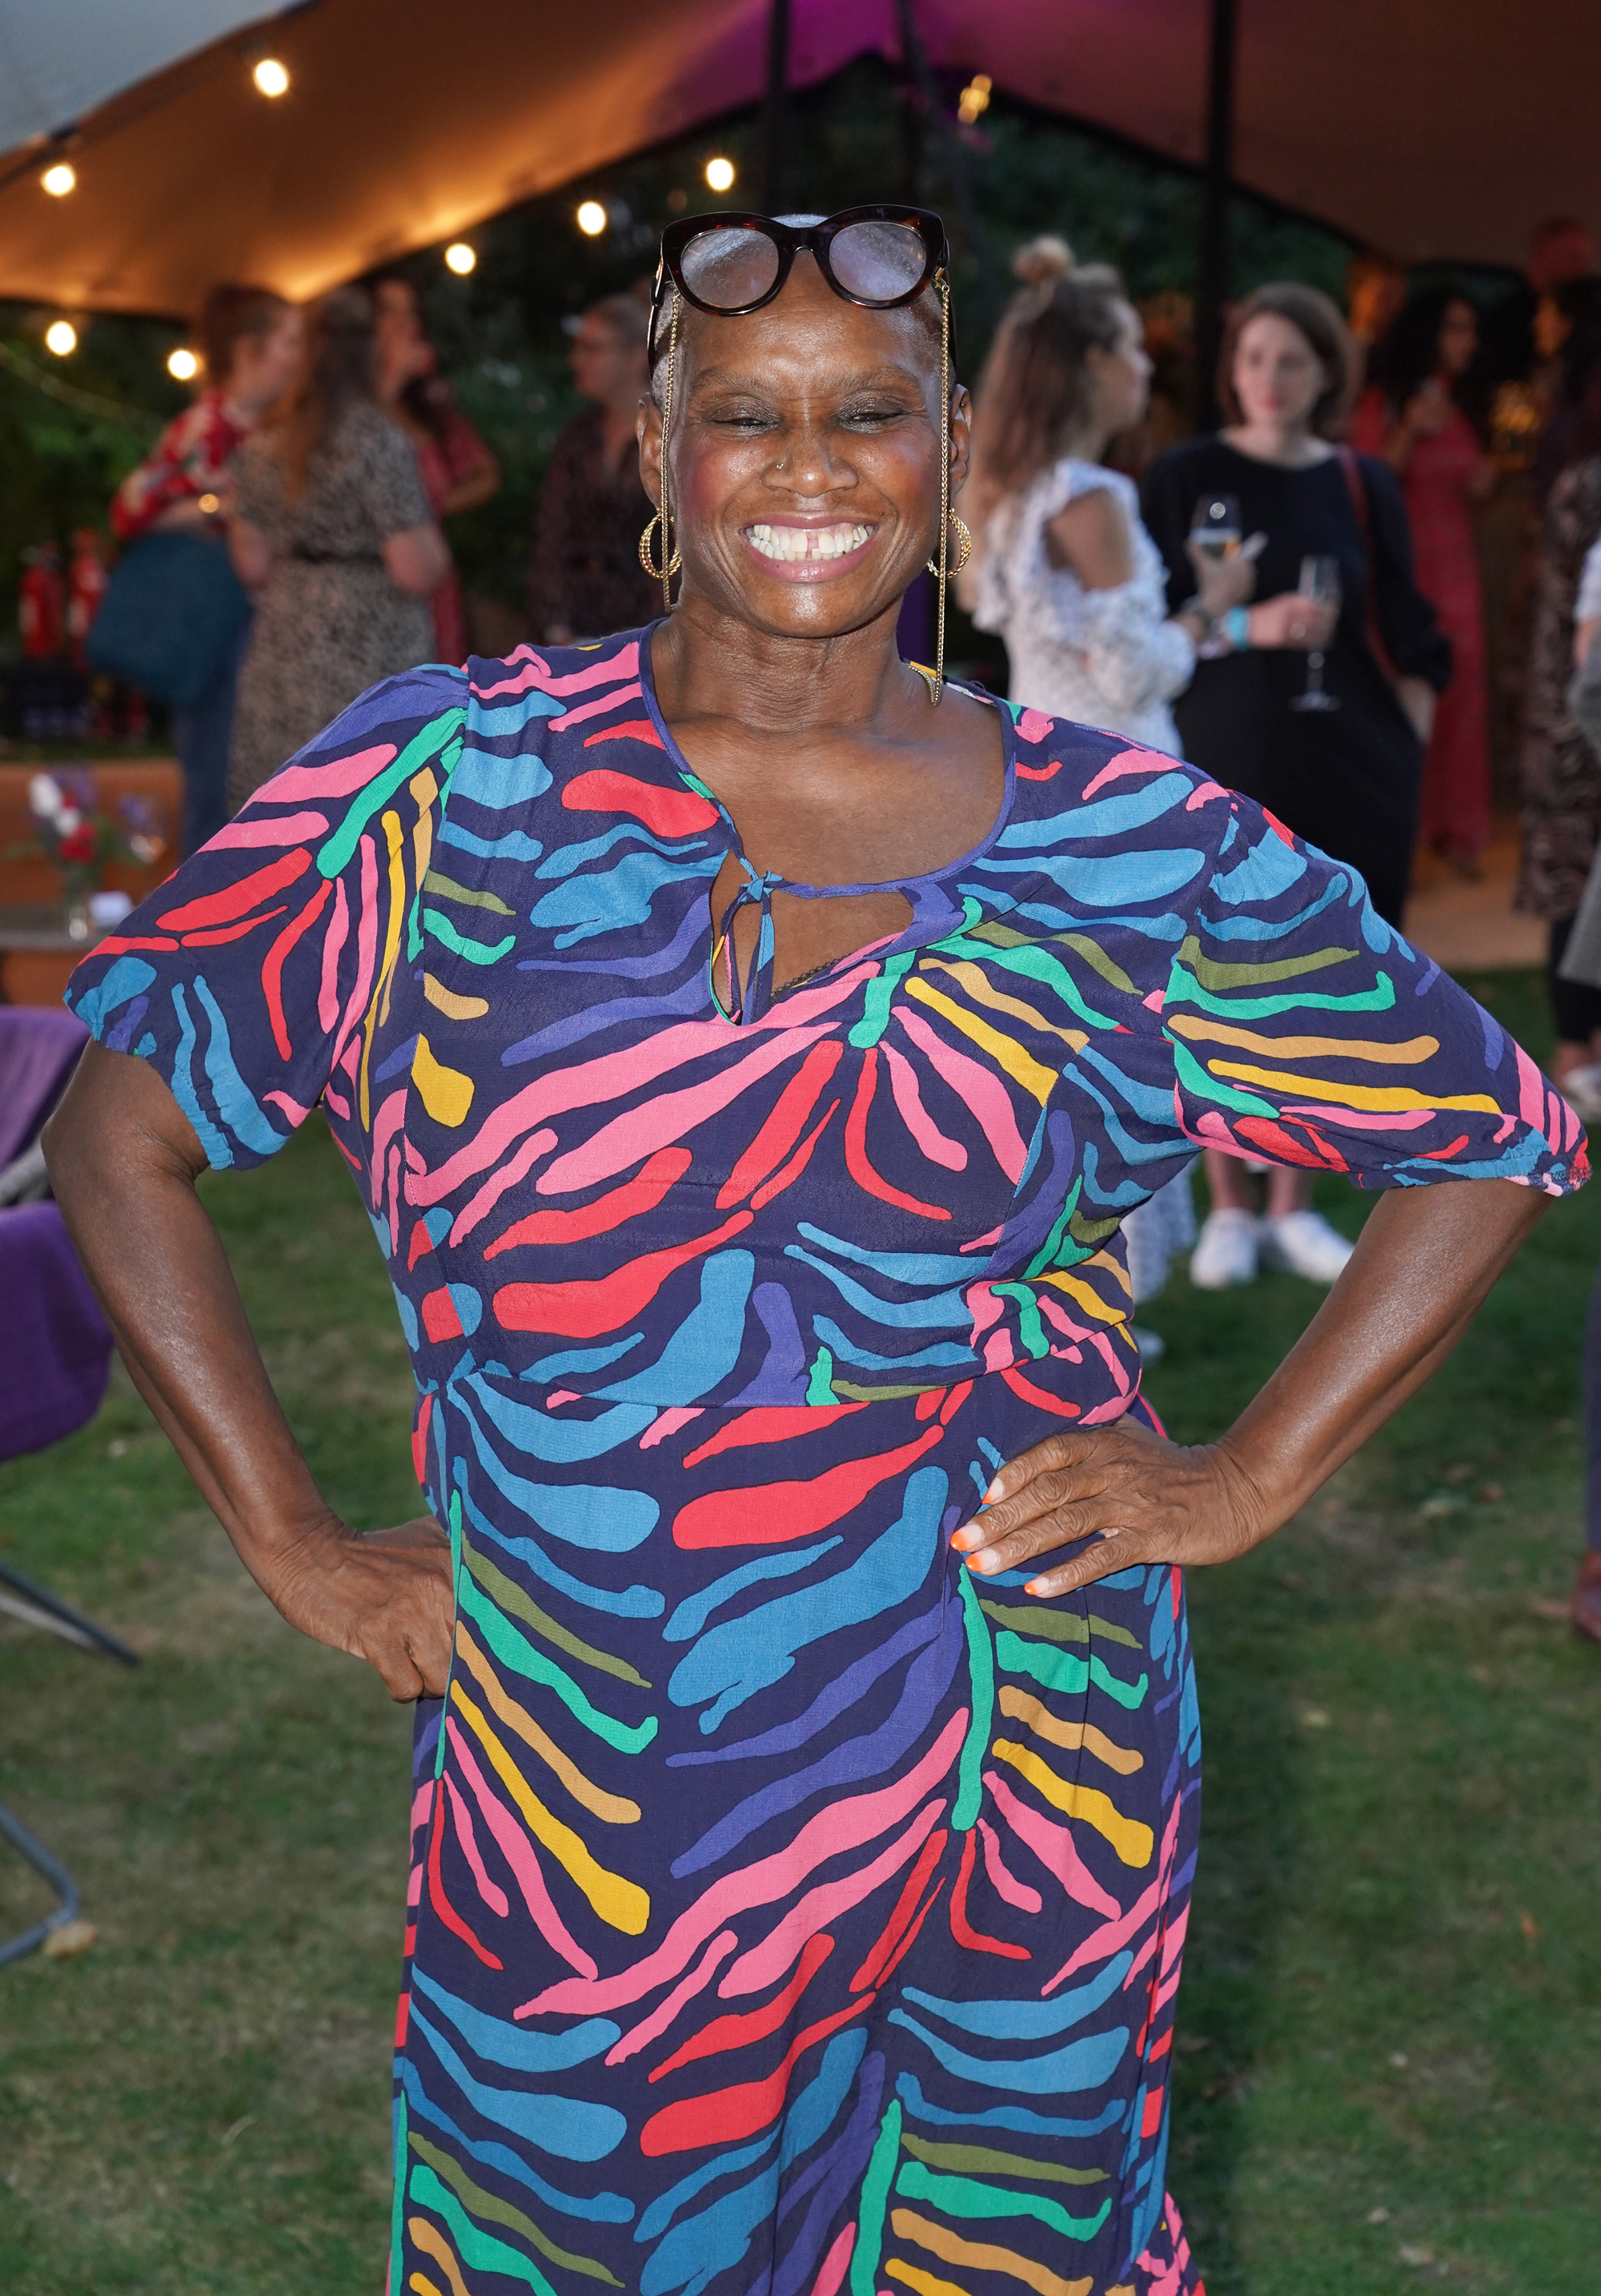 Andi Oliver attending the Women's Prize for Fiction awards